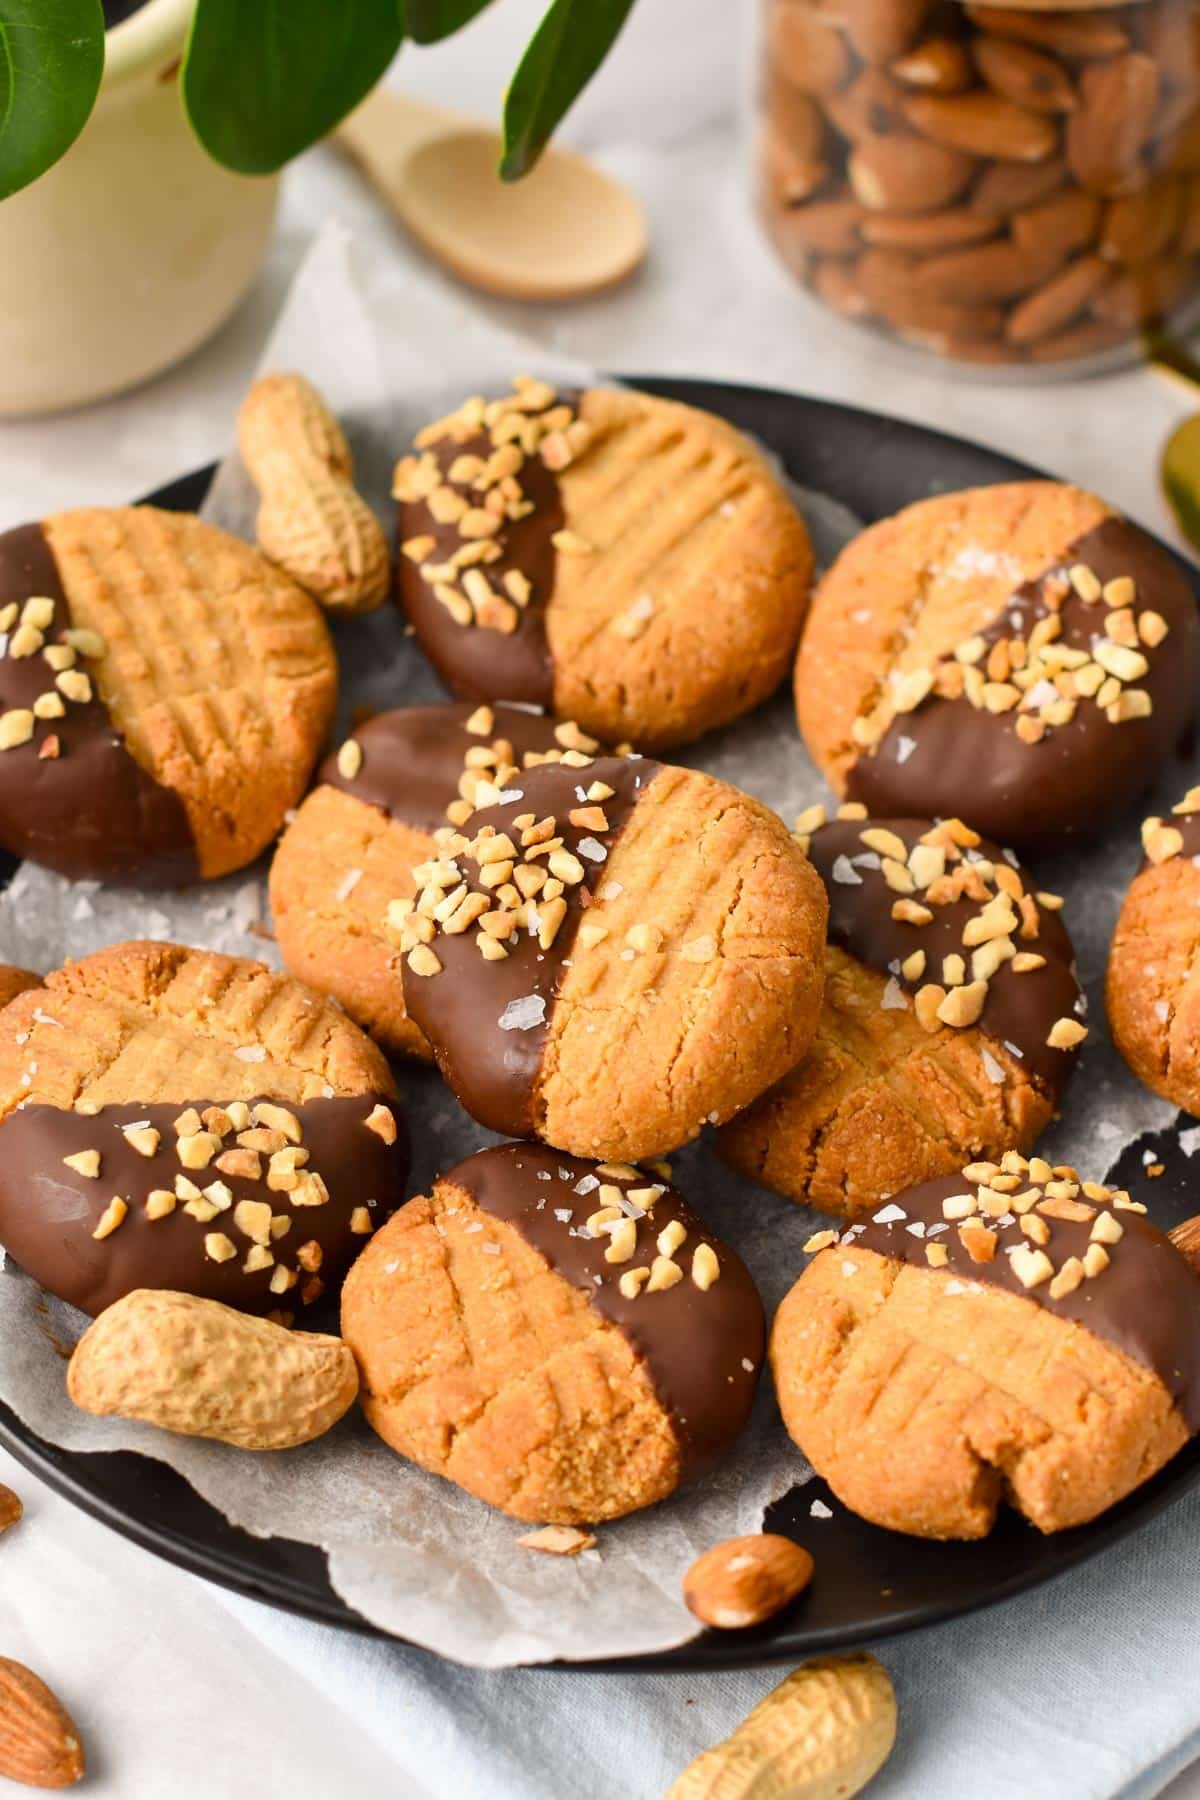 A black plate lined with white parchment paper and filled with lots of peanut butter cookies, half dipped in dark chocolate and covered with crushed peanuts.